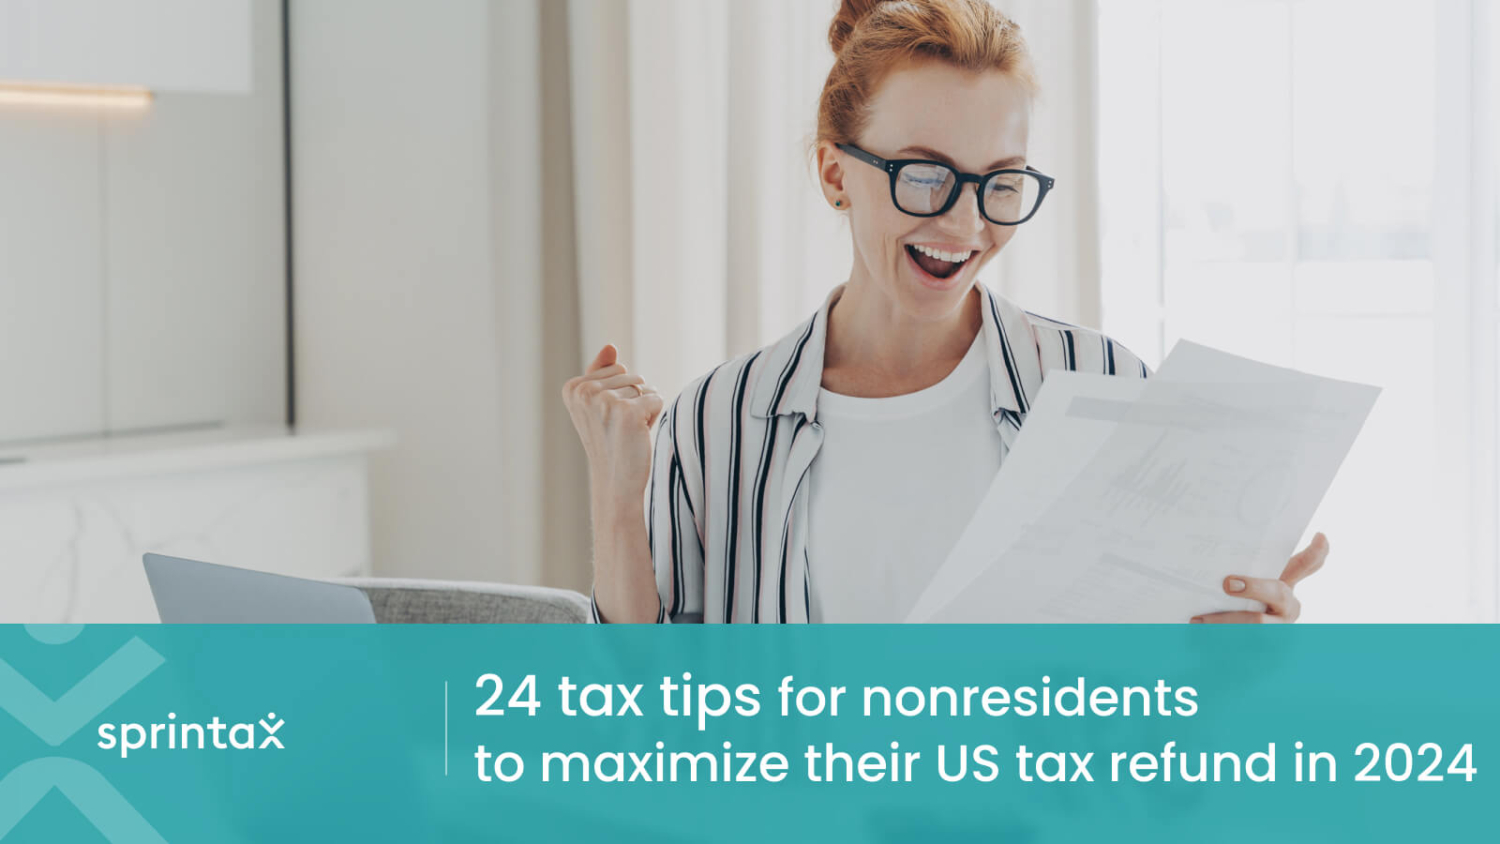 U.S. nonresident tax-refund tips for 2024